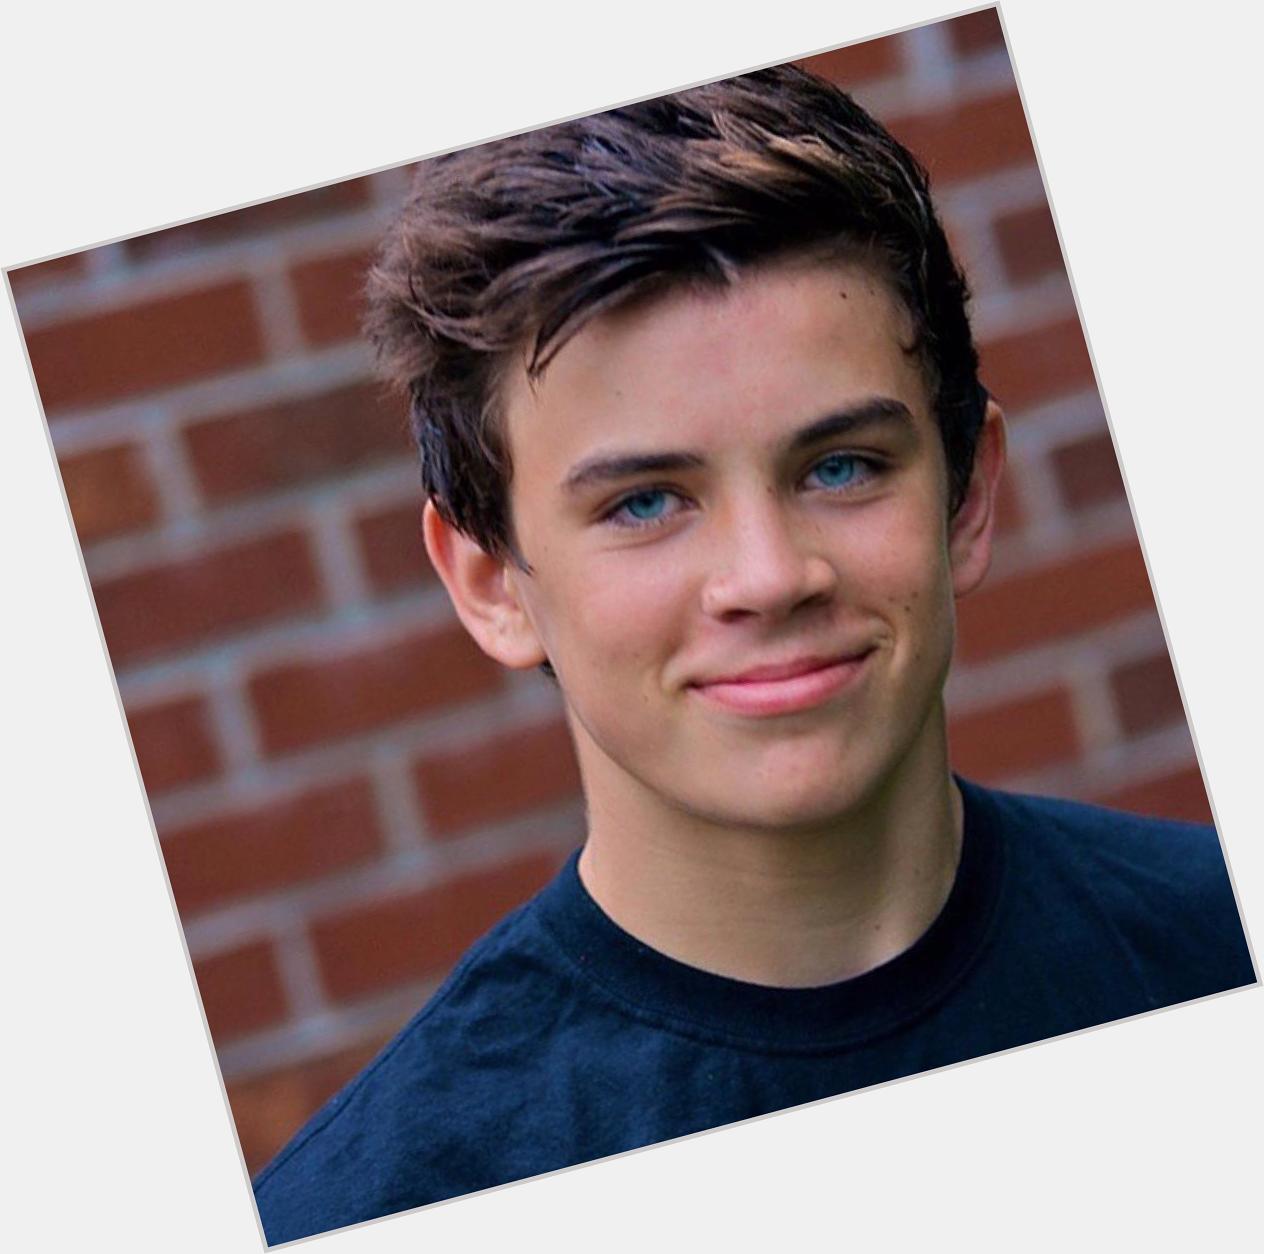 Happy birthday to the amazing hayes grier hope u have an amazing day 